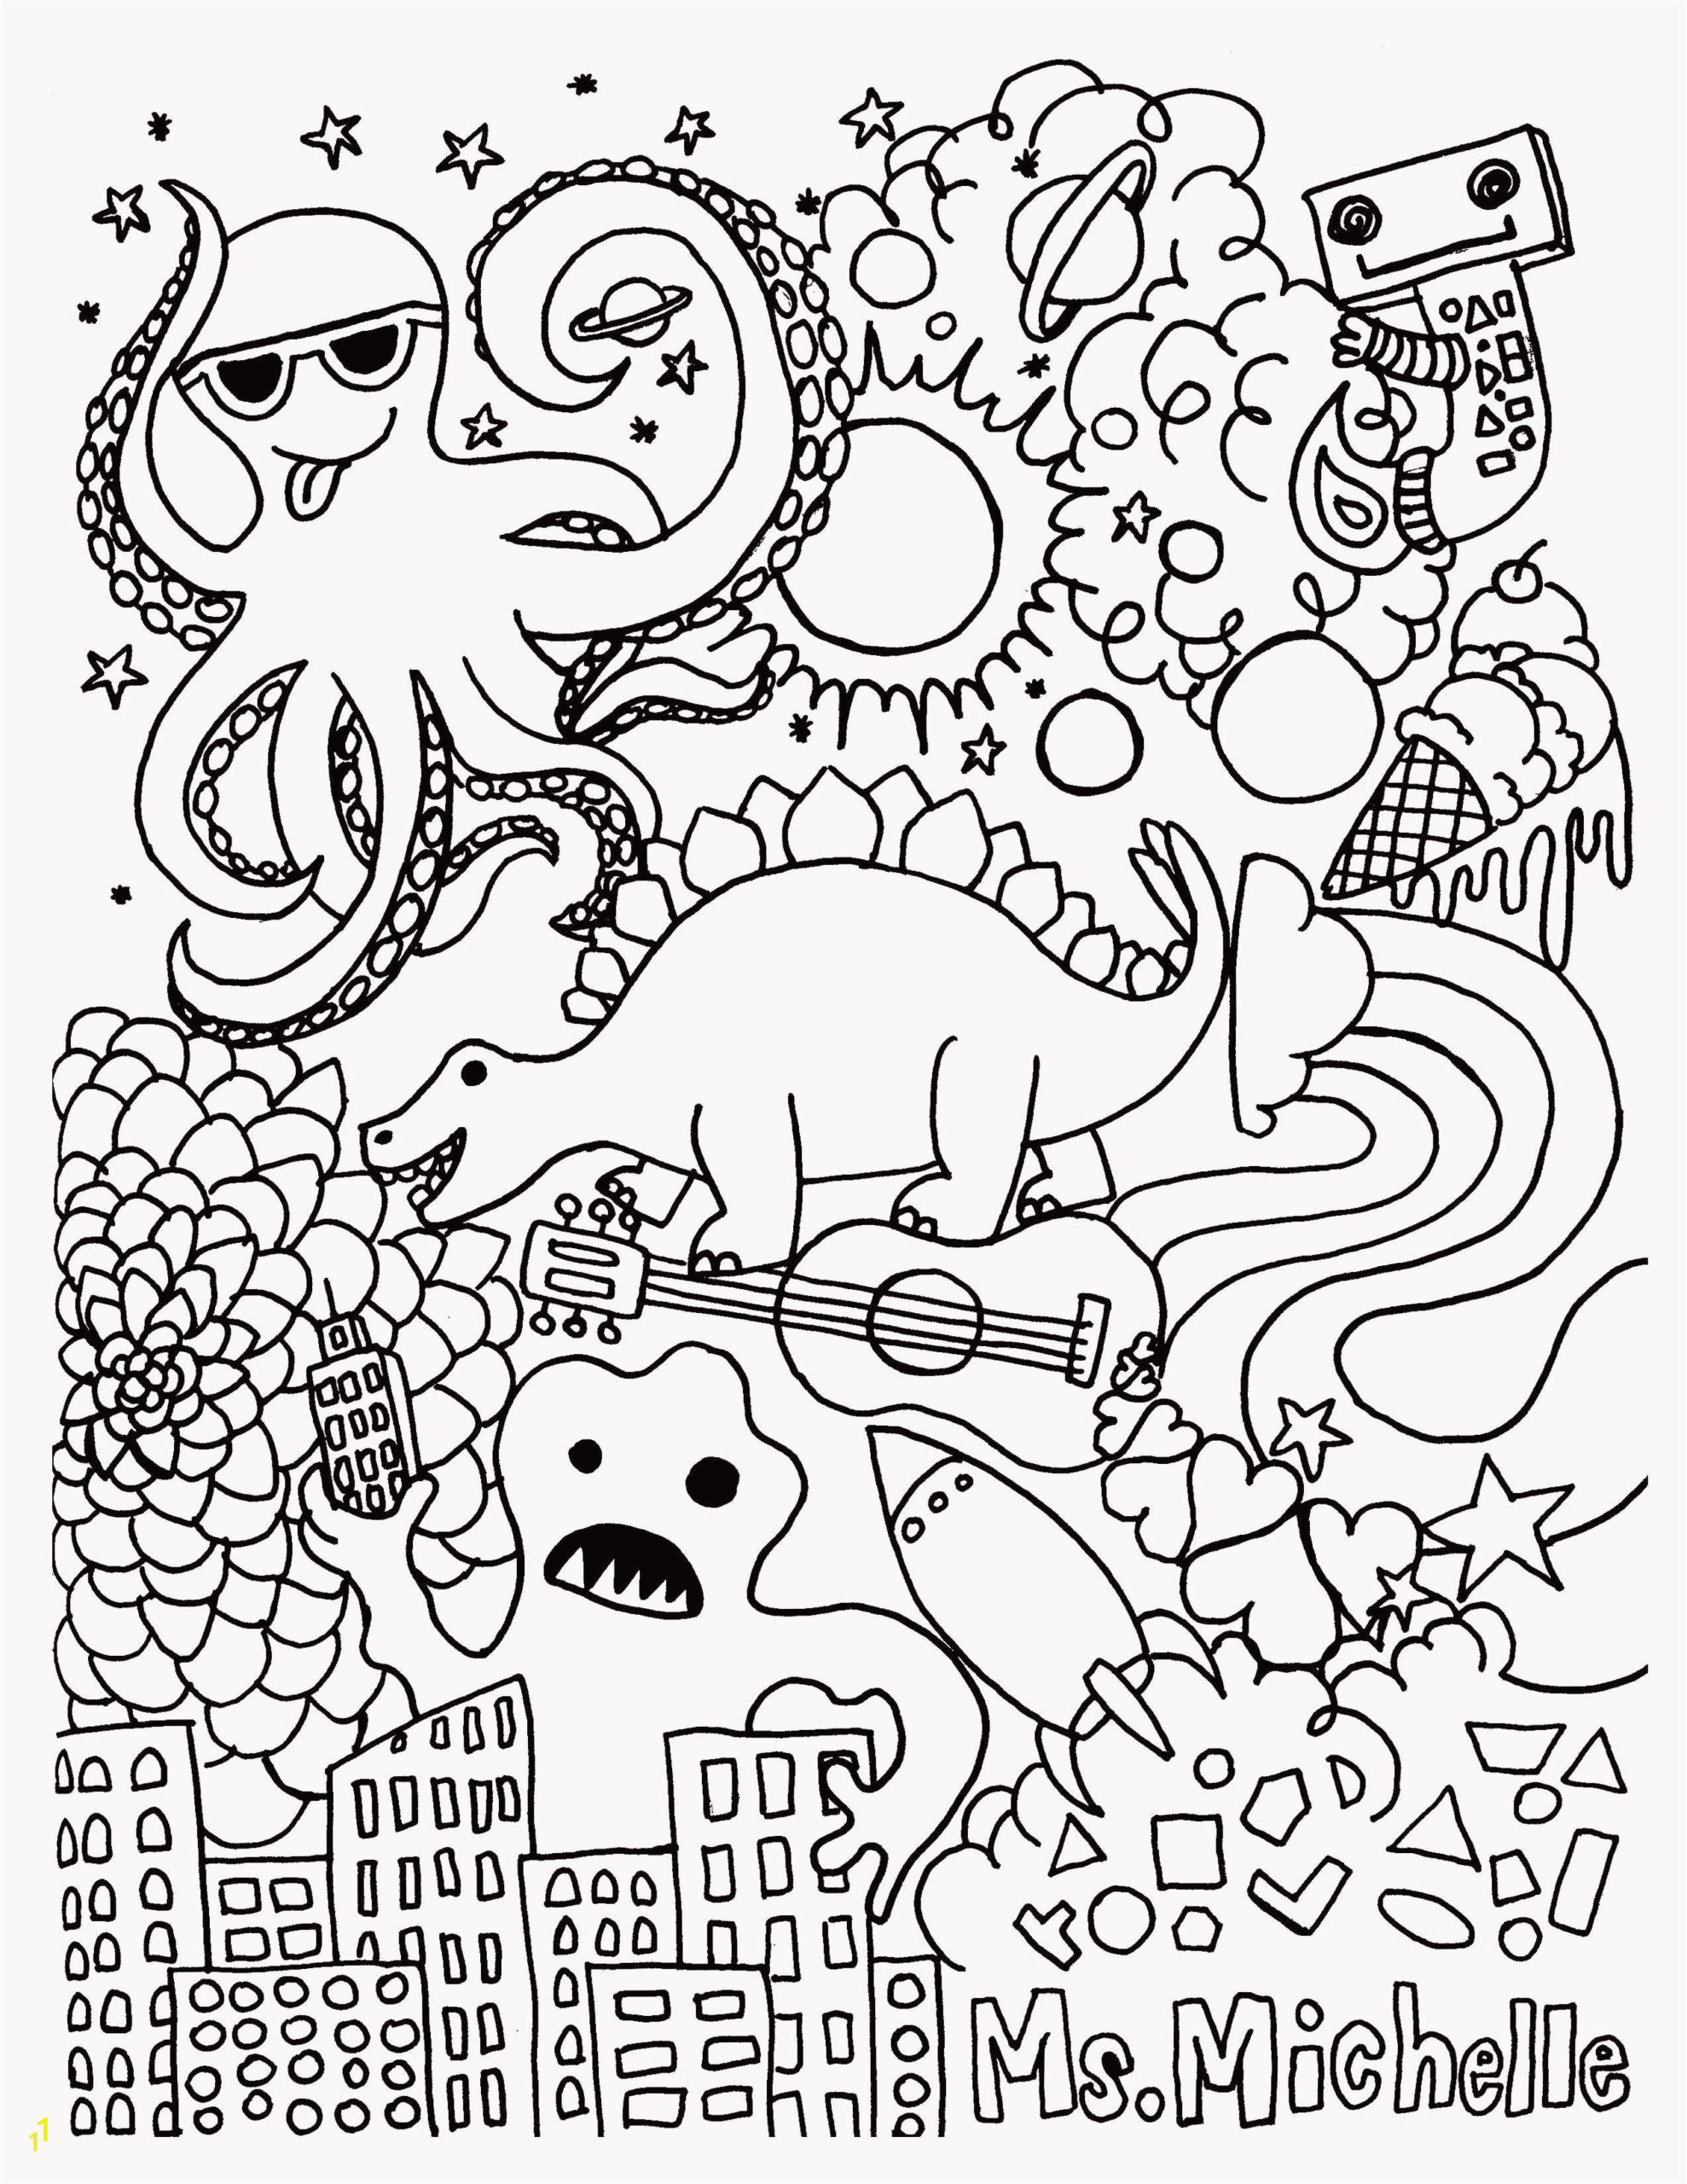 Halloween Princess Coloring Pages Coloring Books Difficult Colouring Christmas Lights